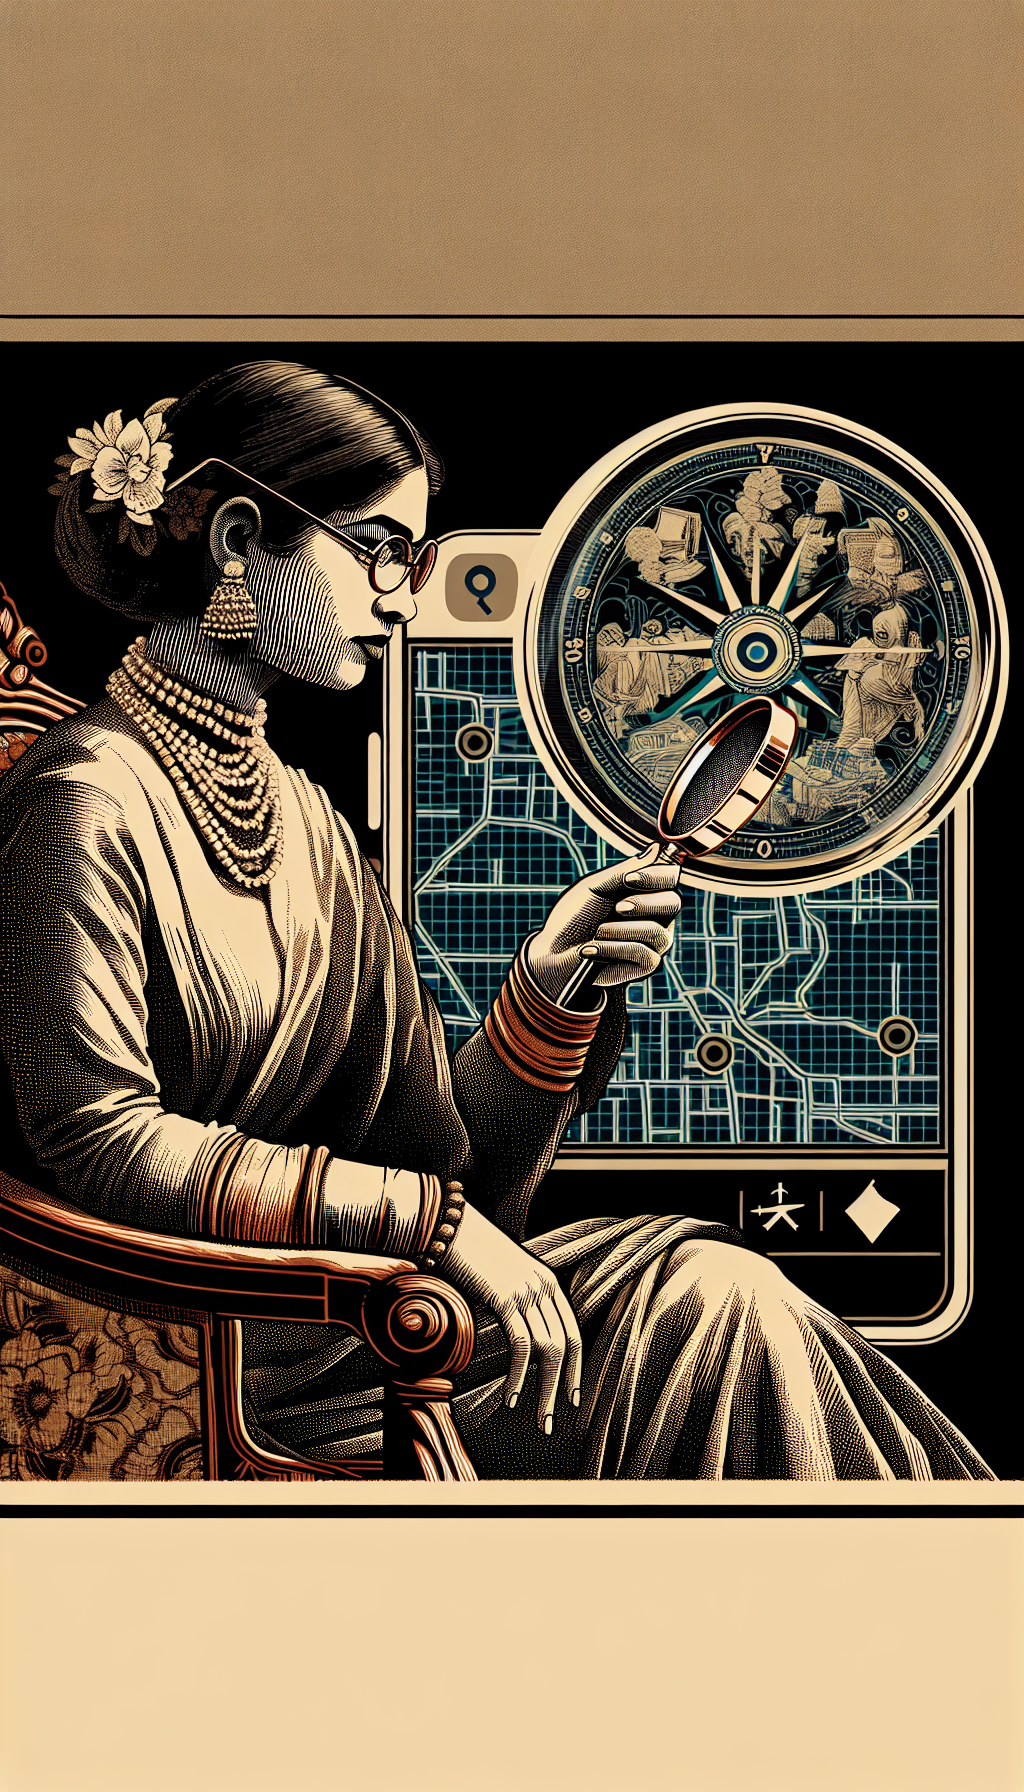 An elegant, bespectacled appraiser, magnifying glass in hand, examines a richly detailed antique chair, while behind them, a semi-transparent map hovers, dotted with vintage compass icons pinpointing their location. The image seamlessly blends classic etching with modern, flat design elements, emphasizing the timeless craft of appraisal amidst the convenience of local accessibility.